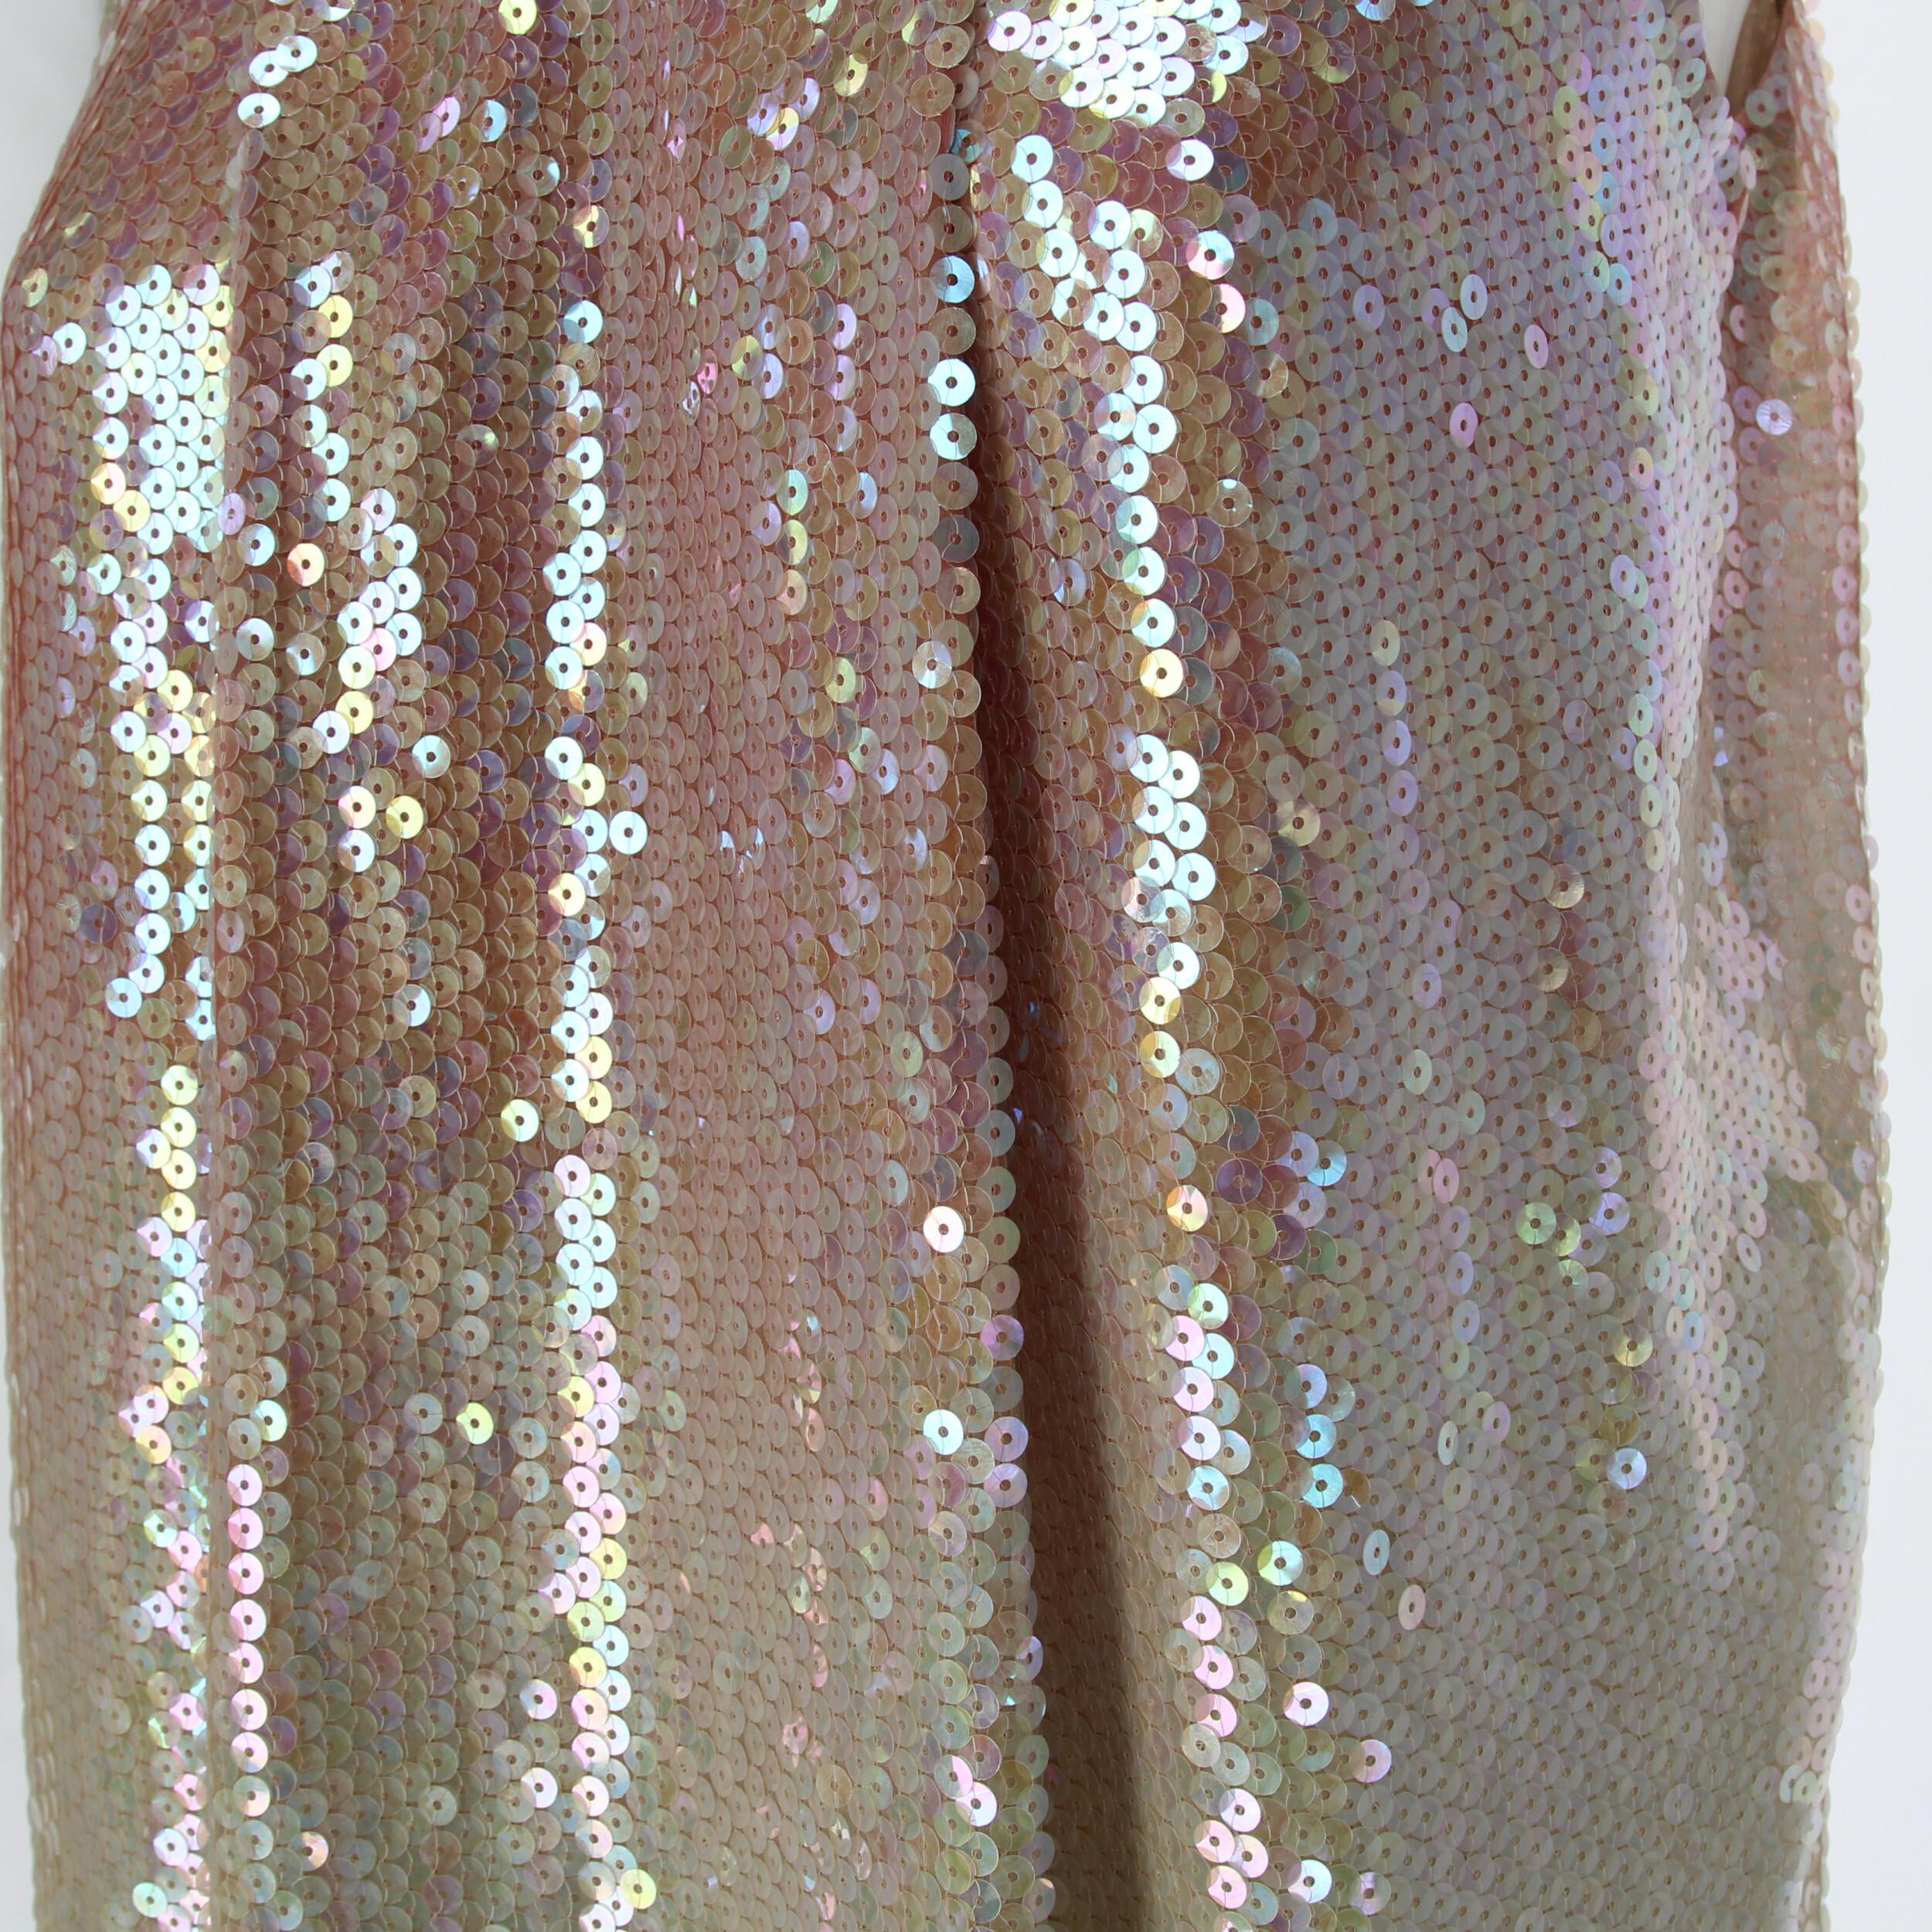 2010s Jil Sander Silk and Sequins Dress in shades of pink, ivory and light grey 1